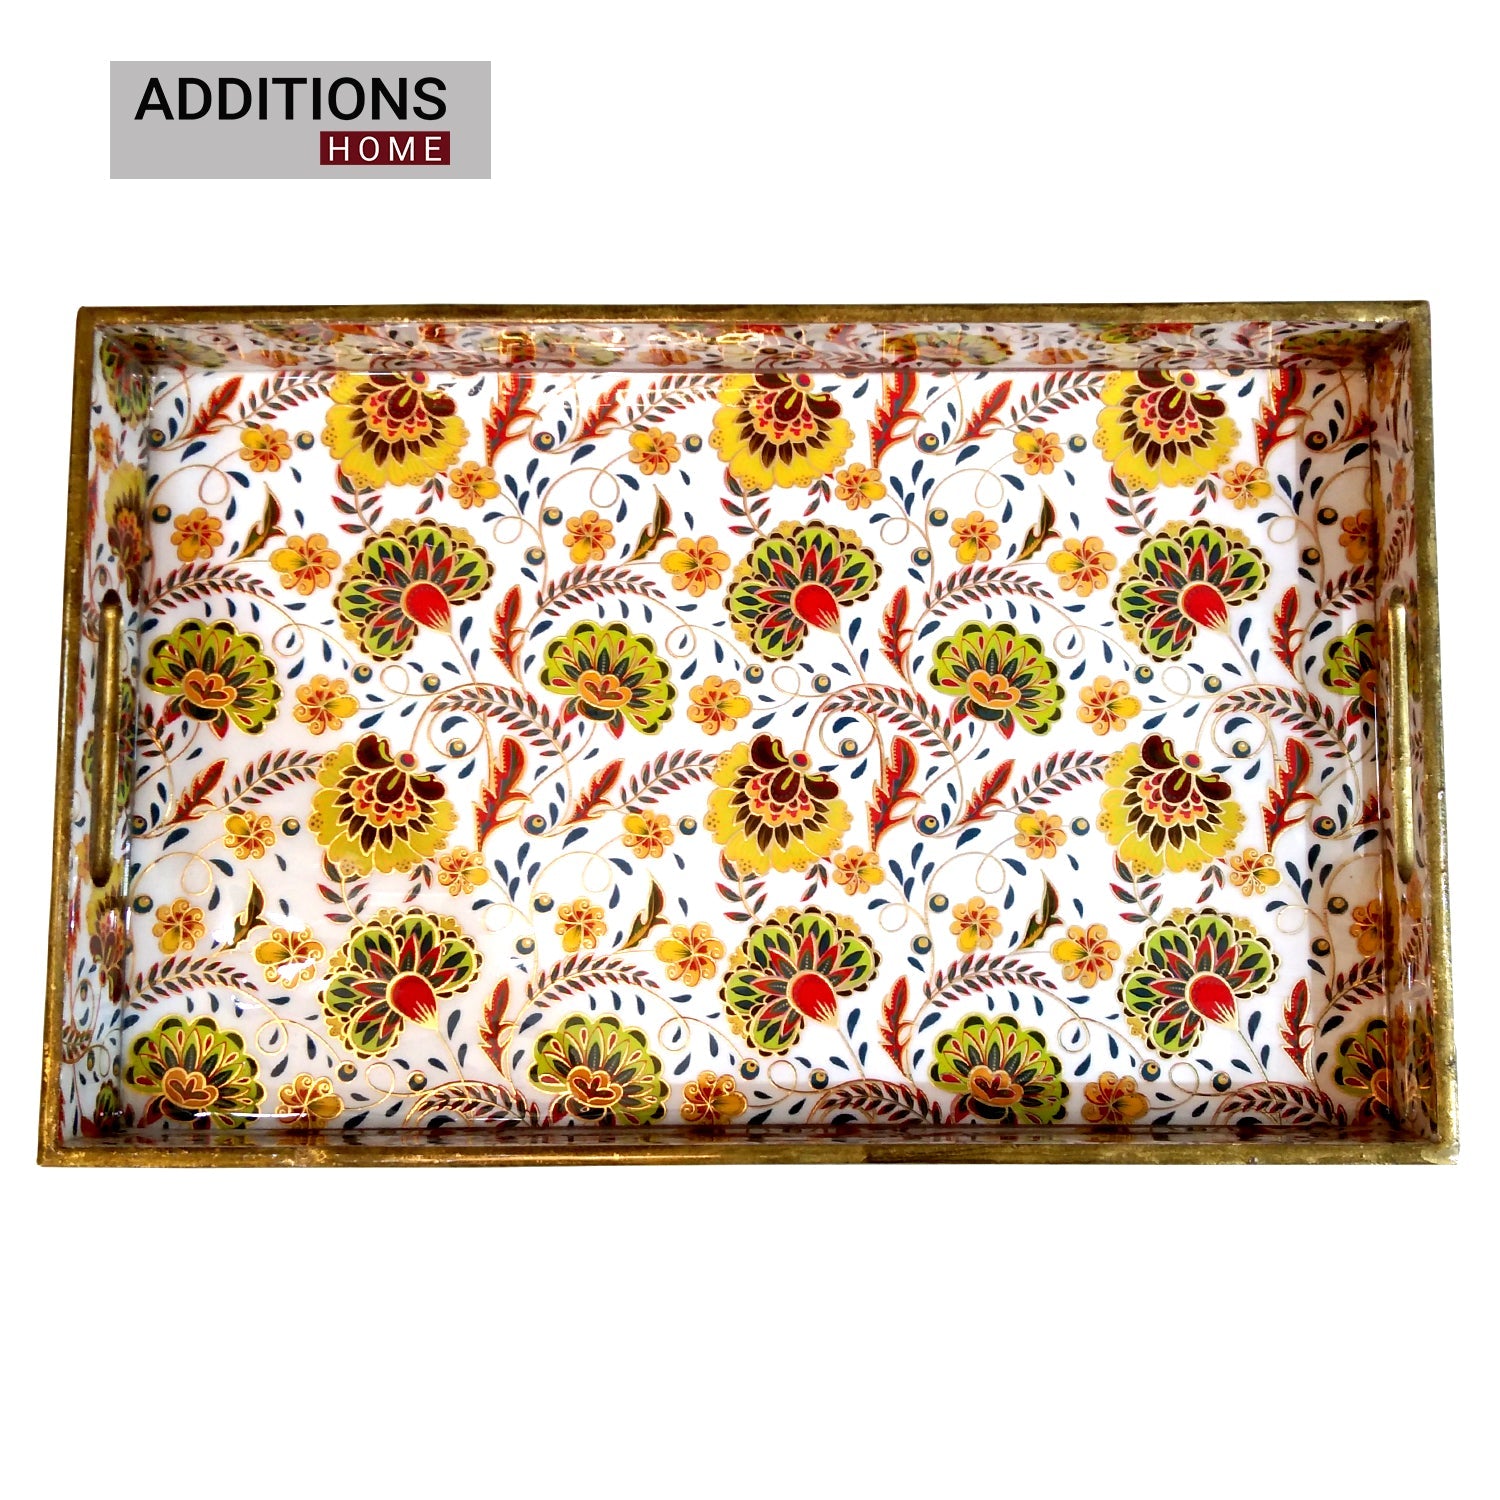 Lacquer Printed Wooden Food and Beverages Serving Tray for Home, Office, Kitchen & Dinning 3 Set